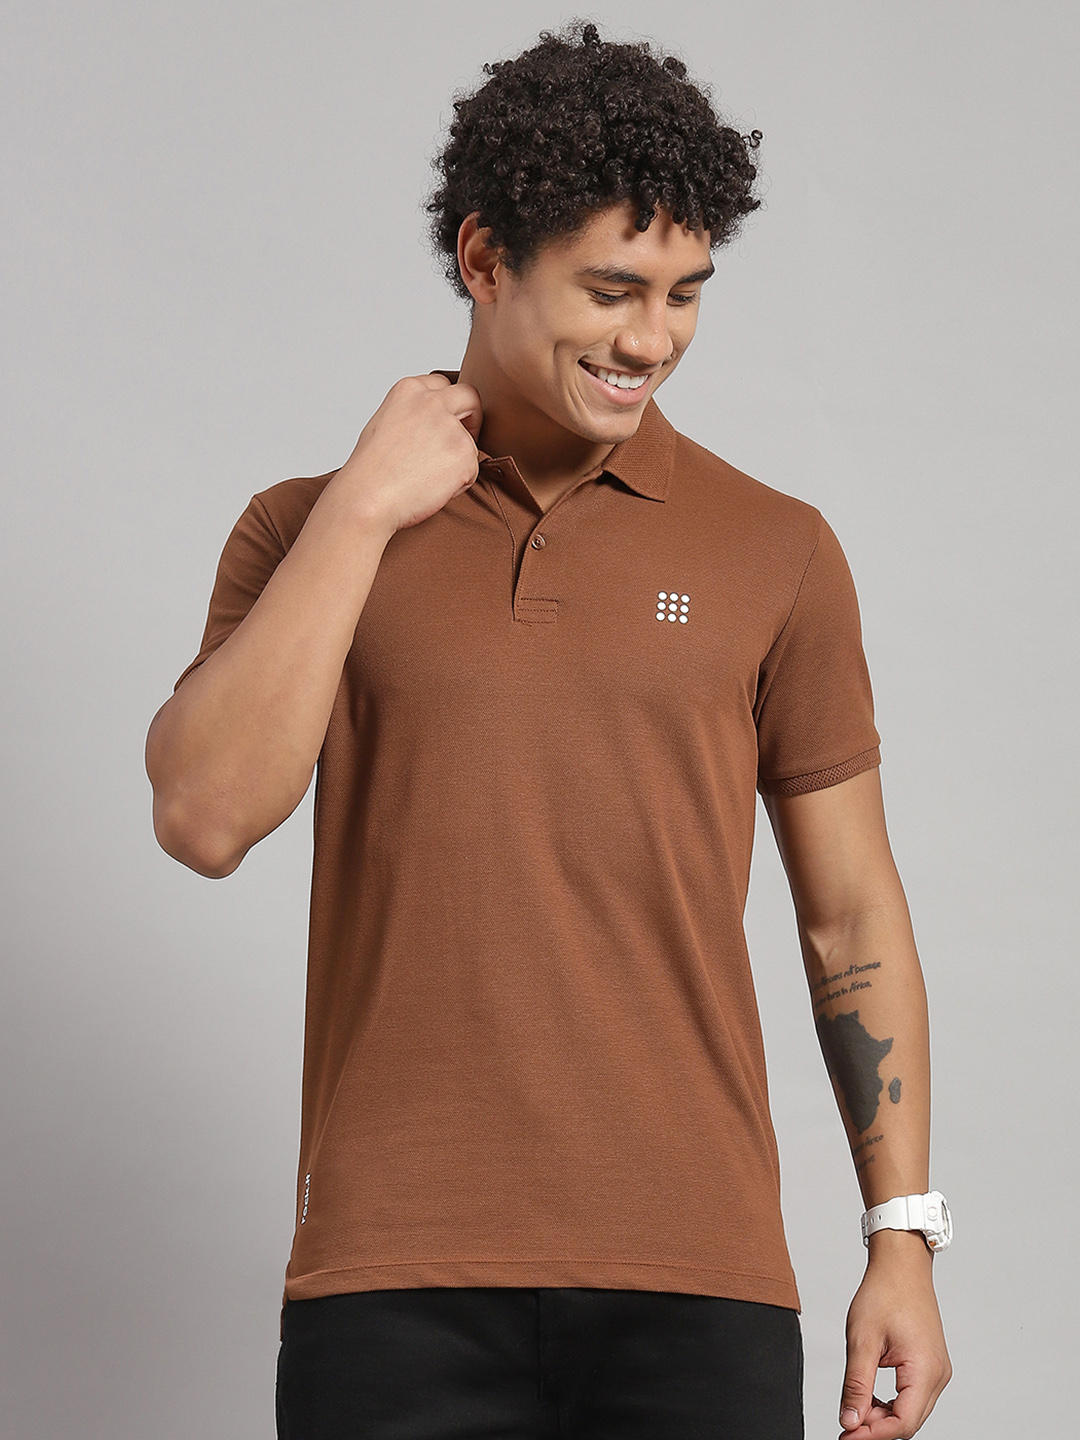 Rock.it Cotton Blend Coffee Brown Solid T-Shirt